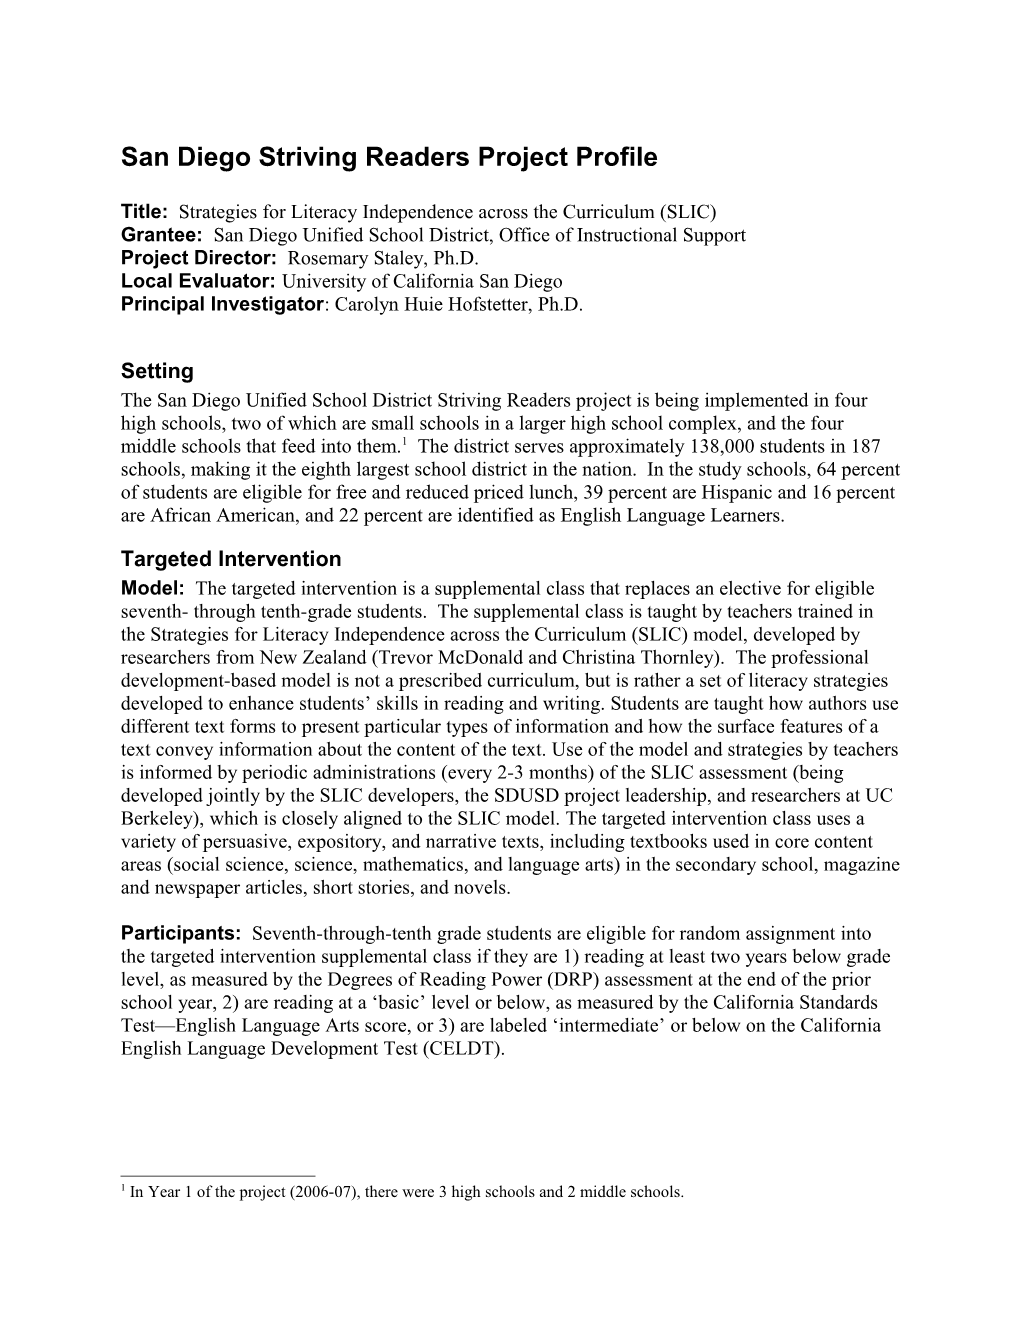 San Diego Striving Readers Project: Project Abstract (MS WORD)